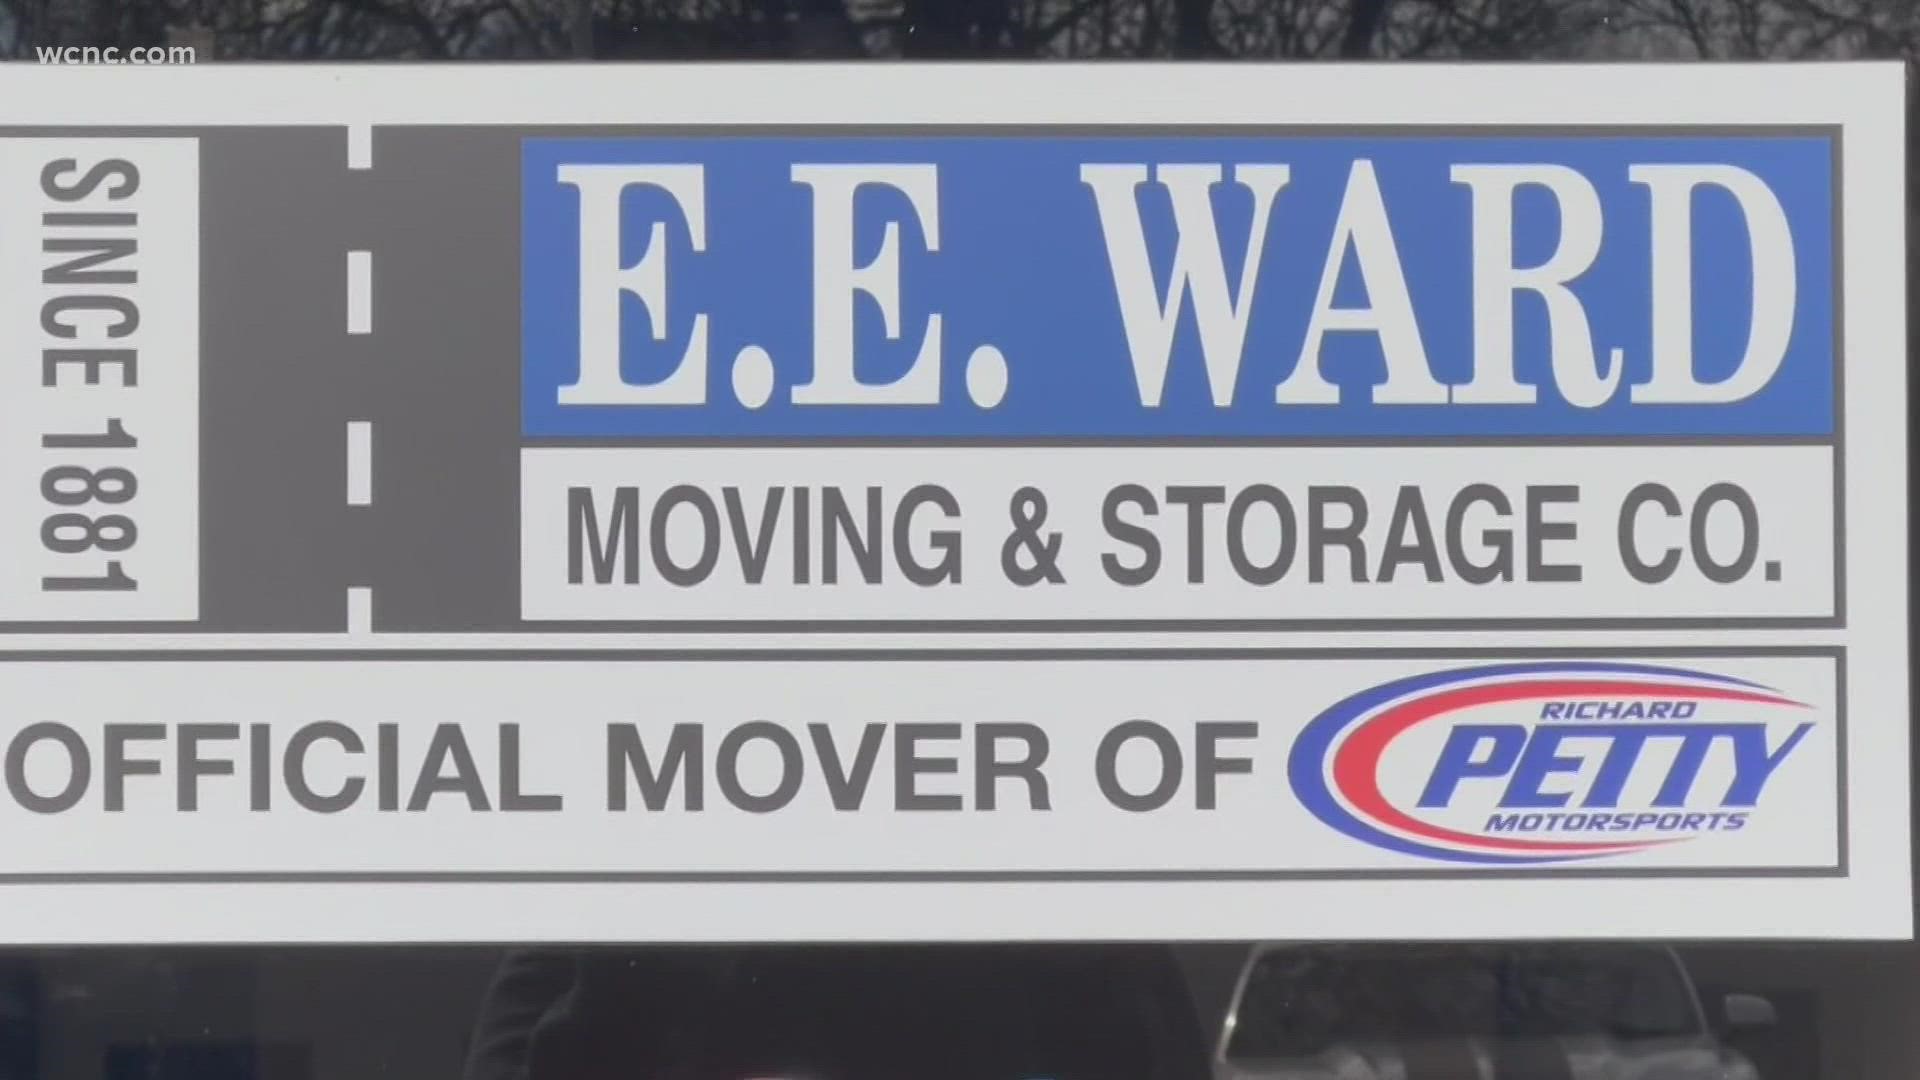 Recognized by the U.S. Department of Commerce, EE Ward Moving & Storage Company dates all the way back to the 1800s getting its start on the underground railroad.